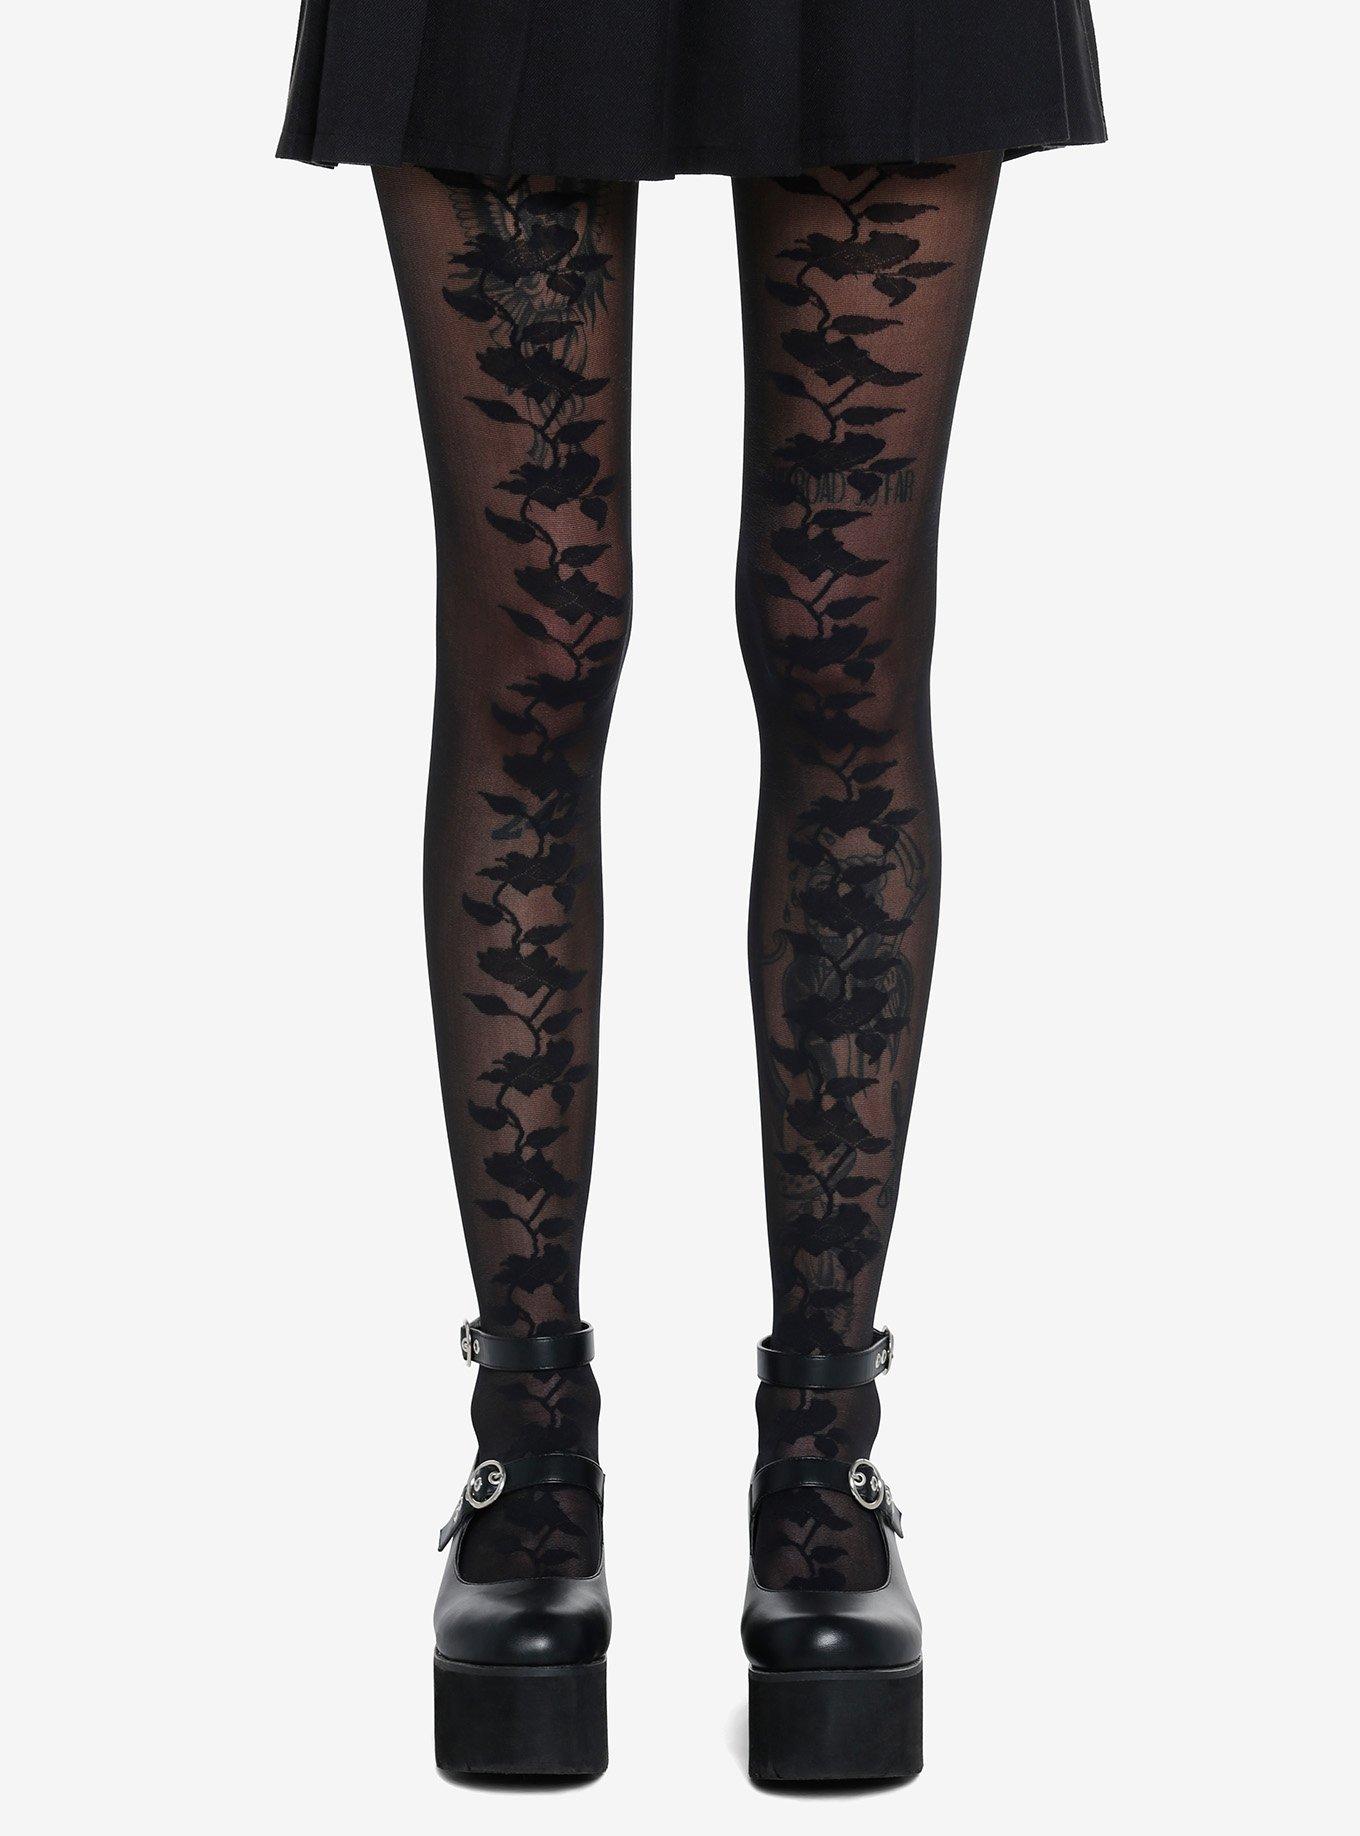 Solid Black Opaque Tights - Hot Topic